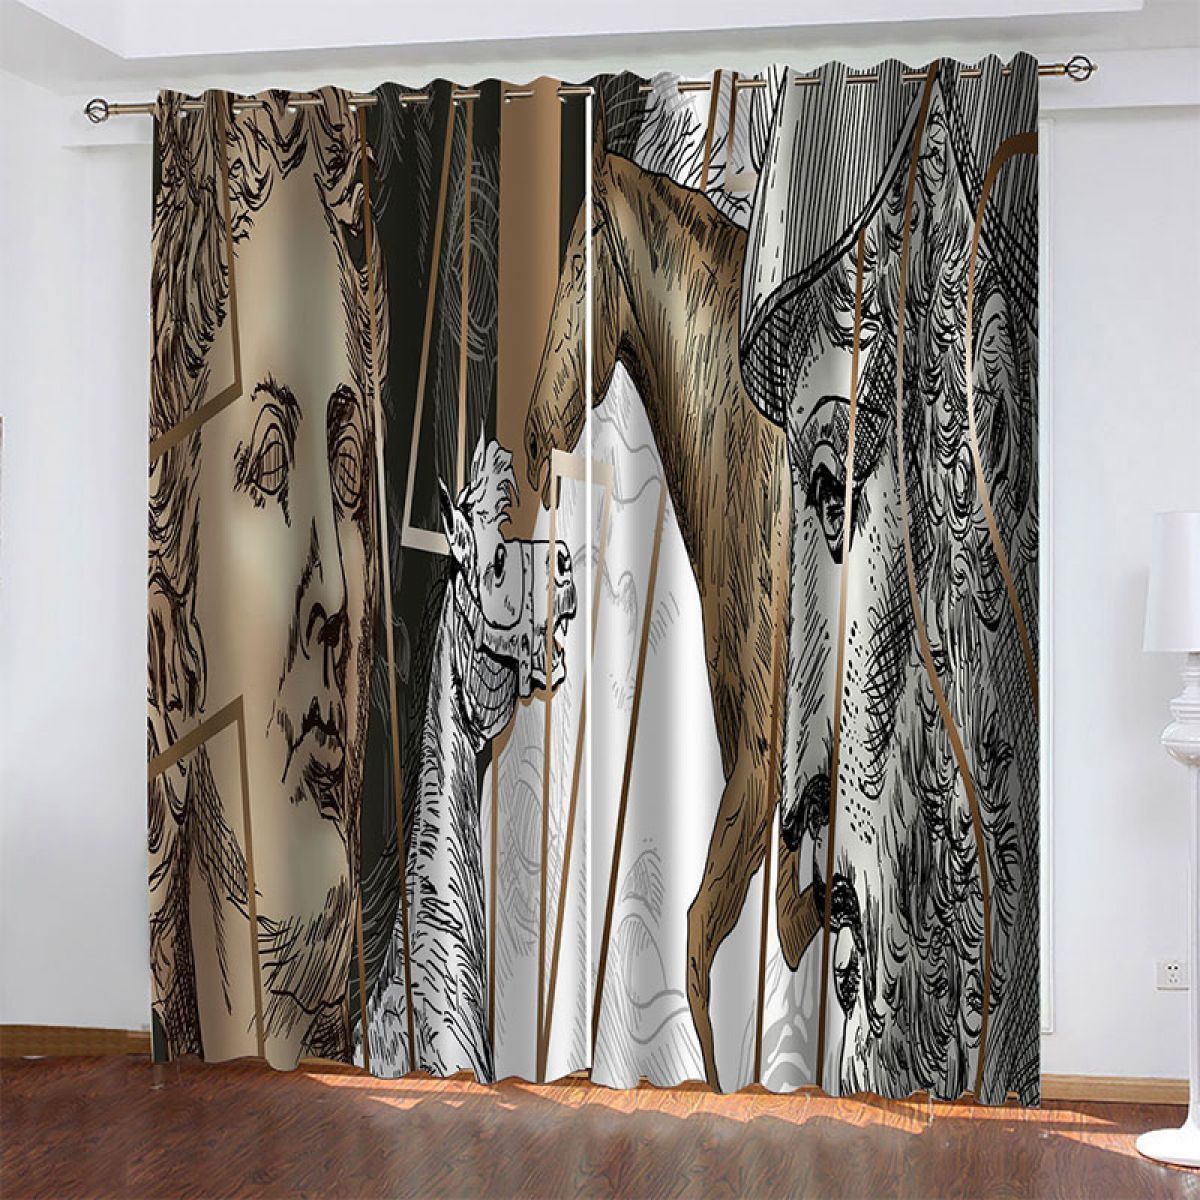 Man And House Printed Window Curtain Home Decor